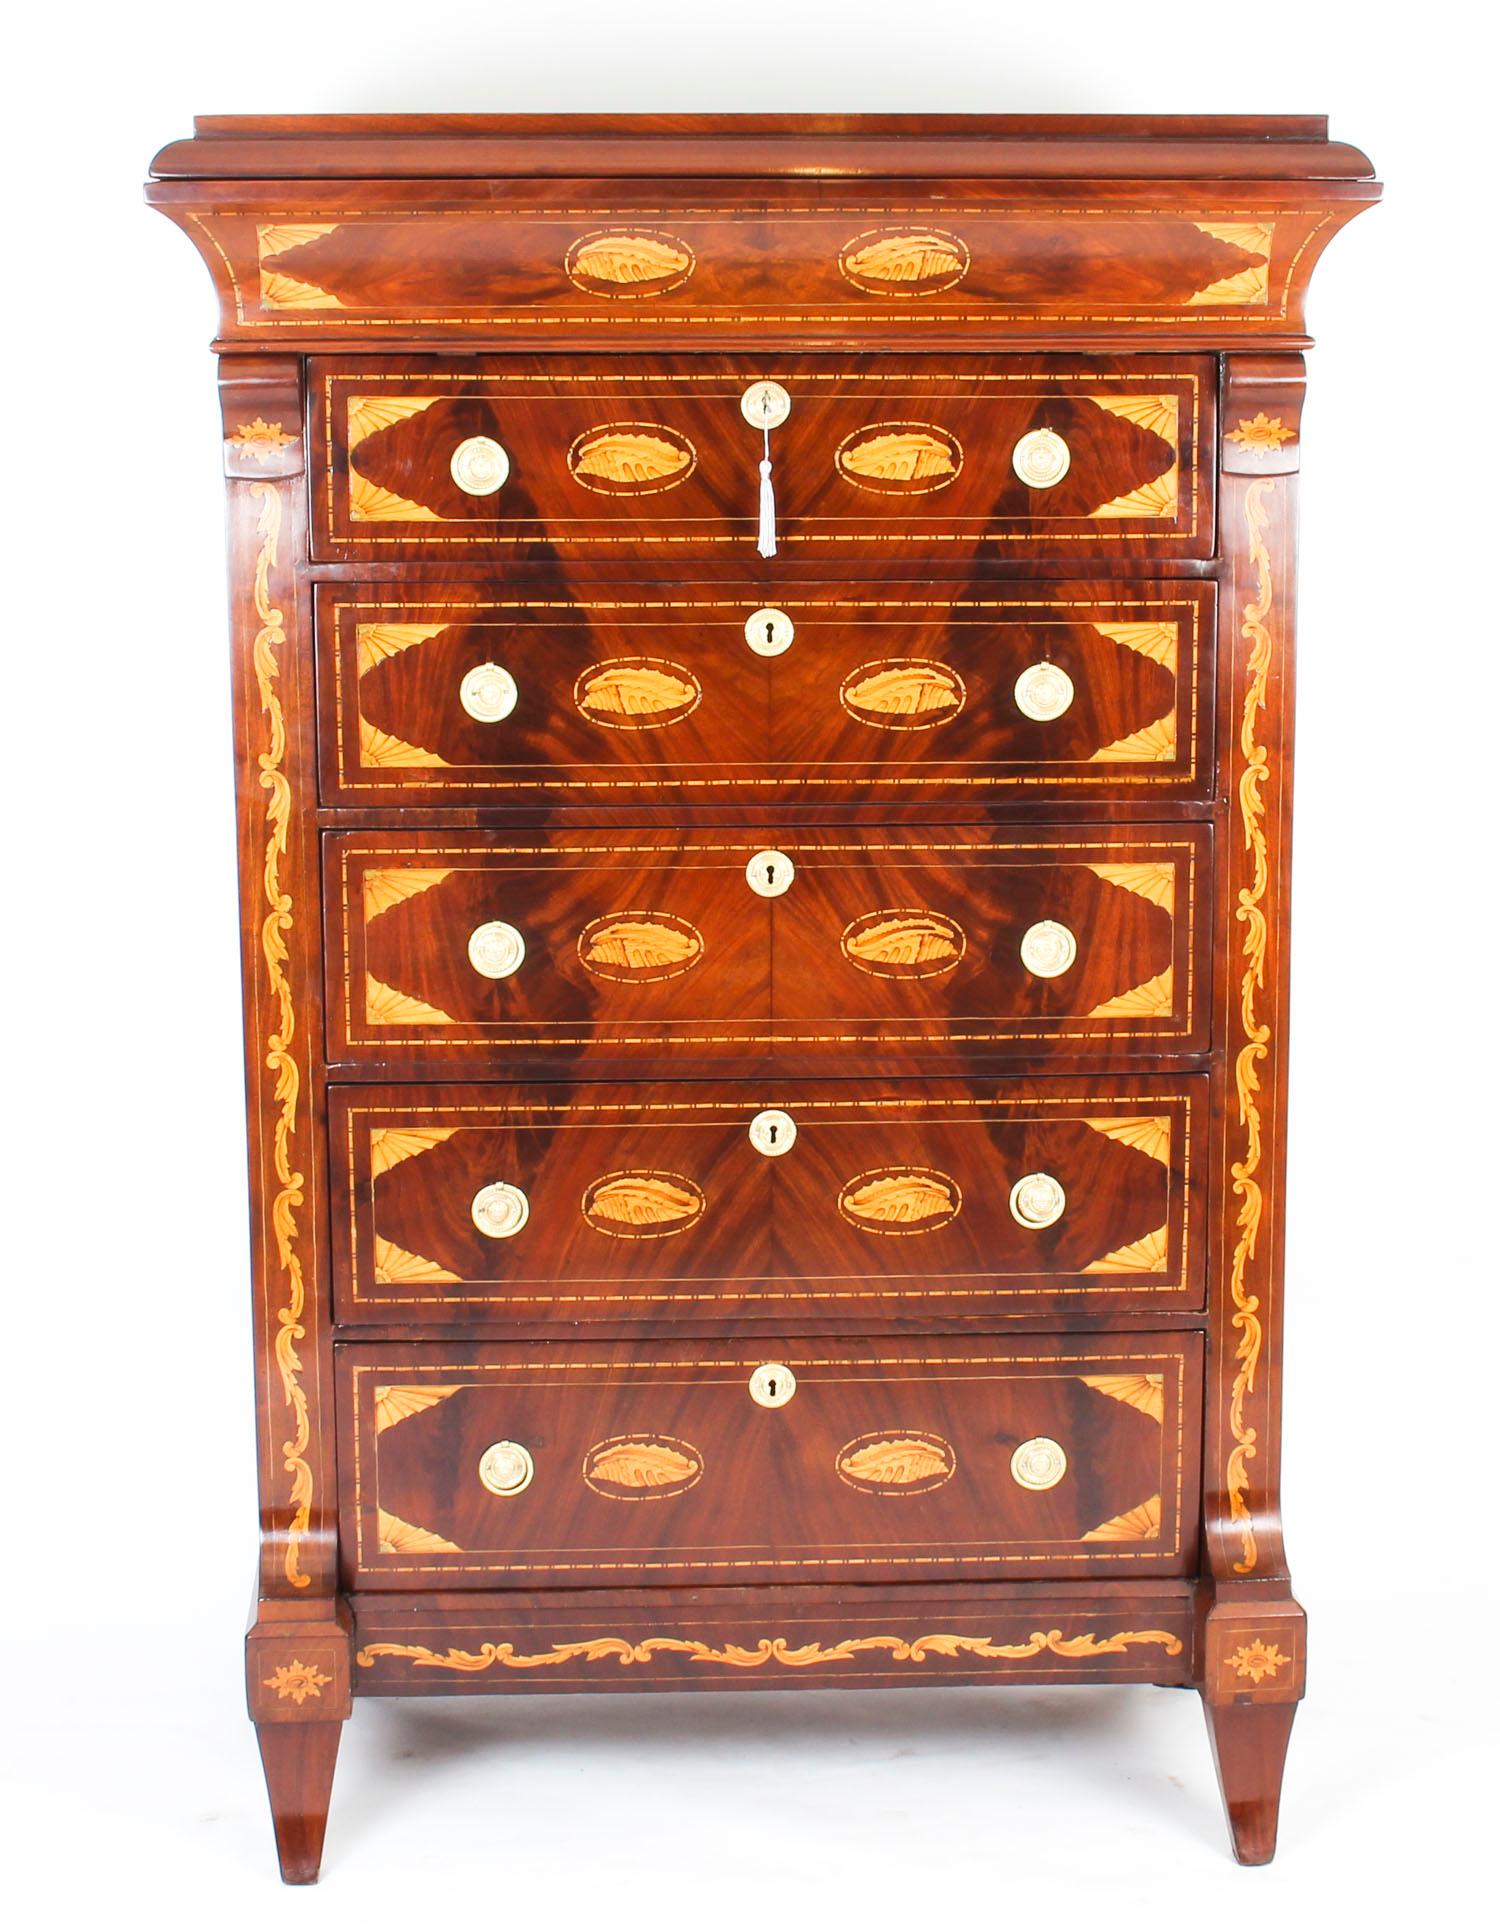 This is a fabulous antique Dutch marquetry walnut chest of drawers, circa 1800 in date.

It has been accomplished in walnut with exquisite handcut marquetry decoration of urns and corner fans typical of the period.

The drawer linings are of solid